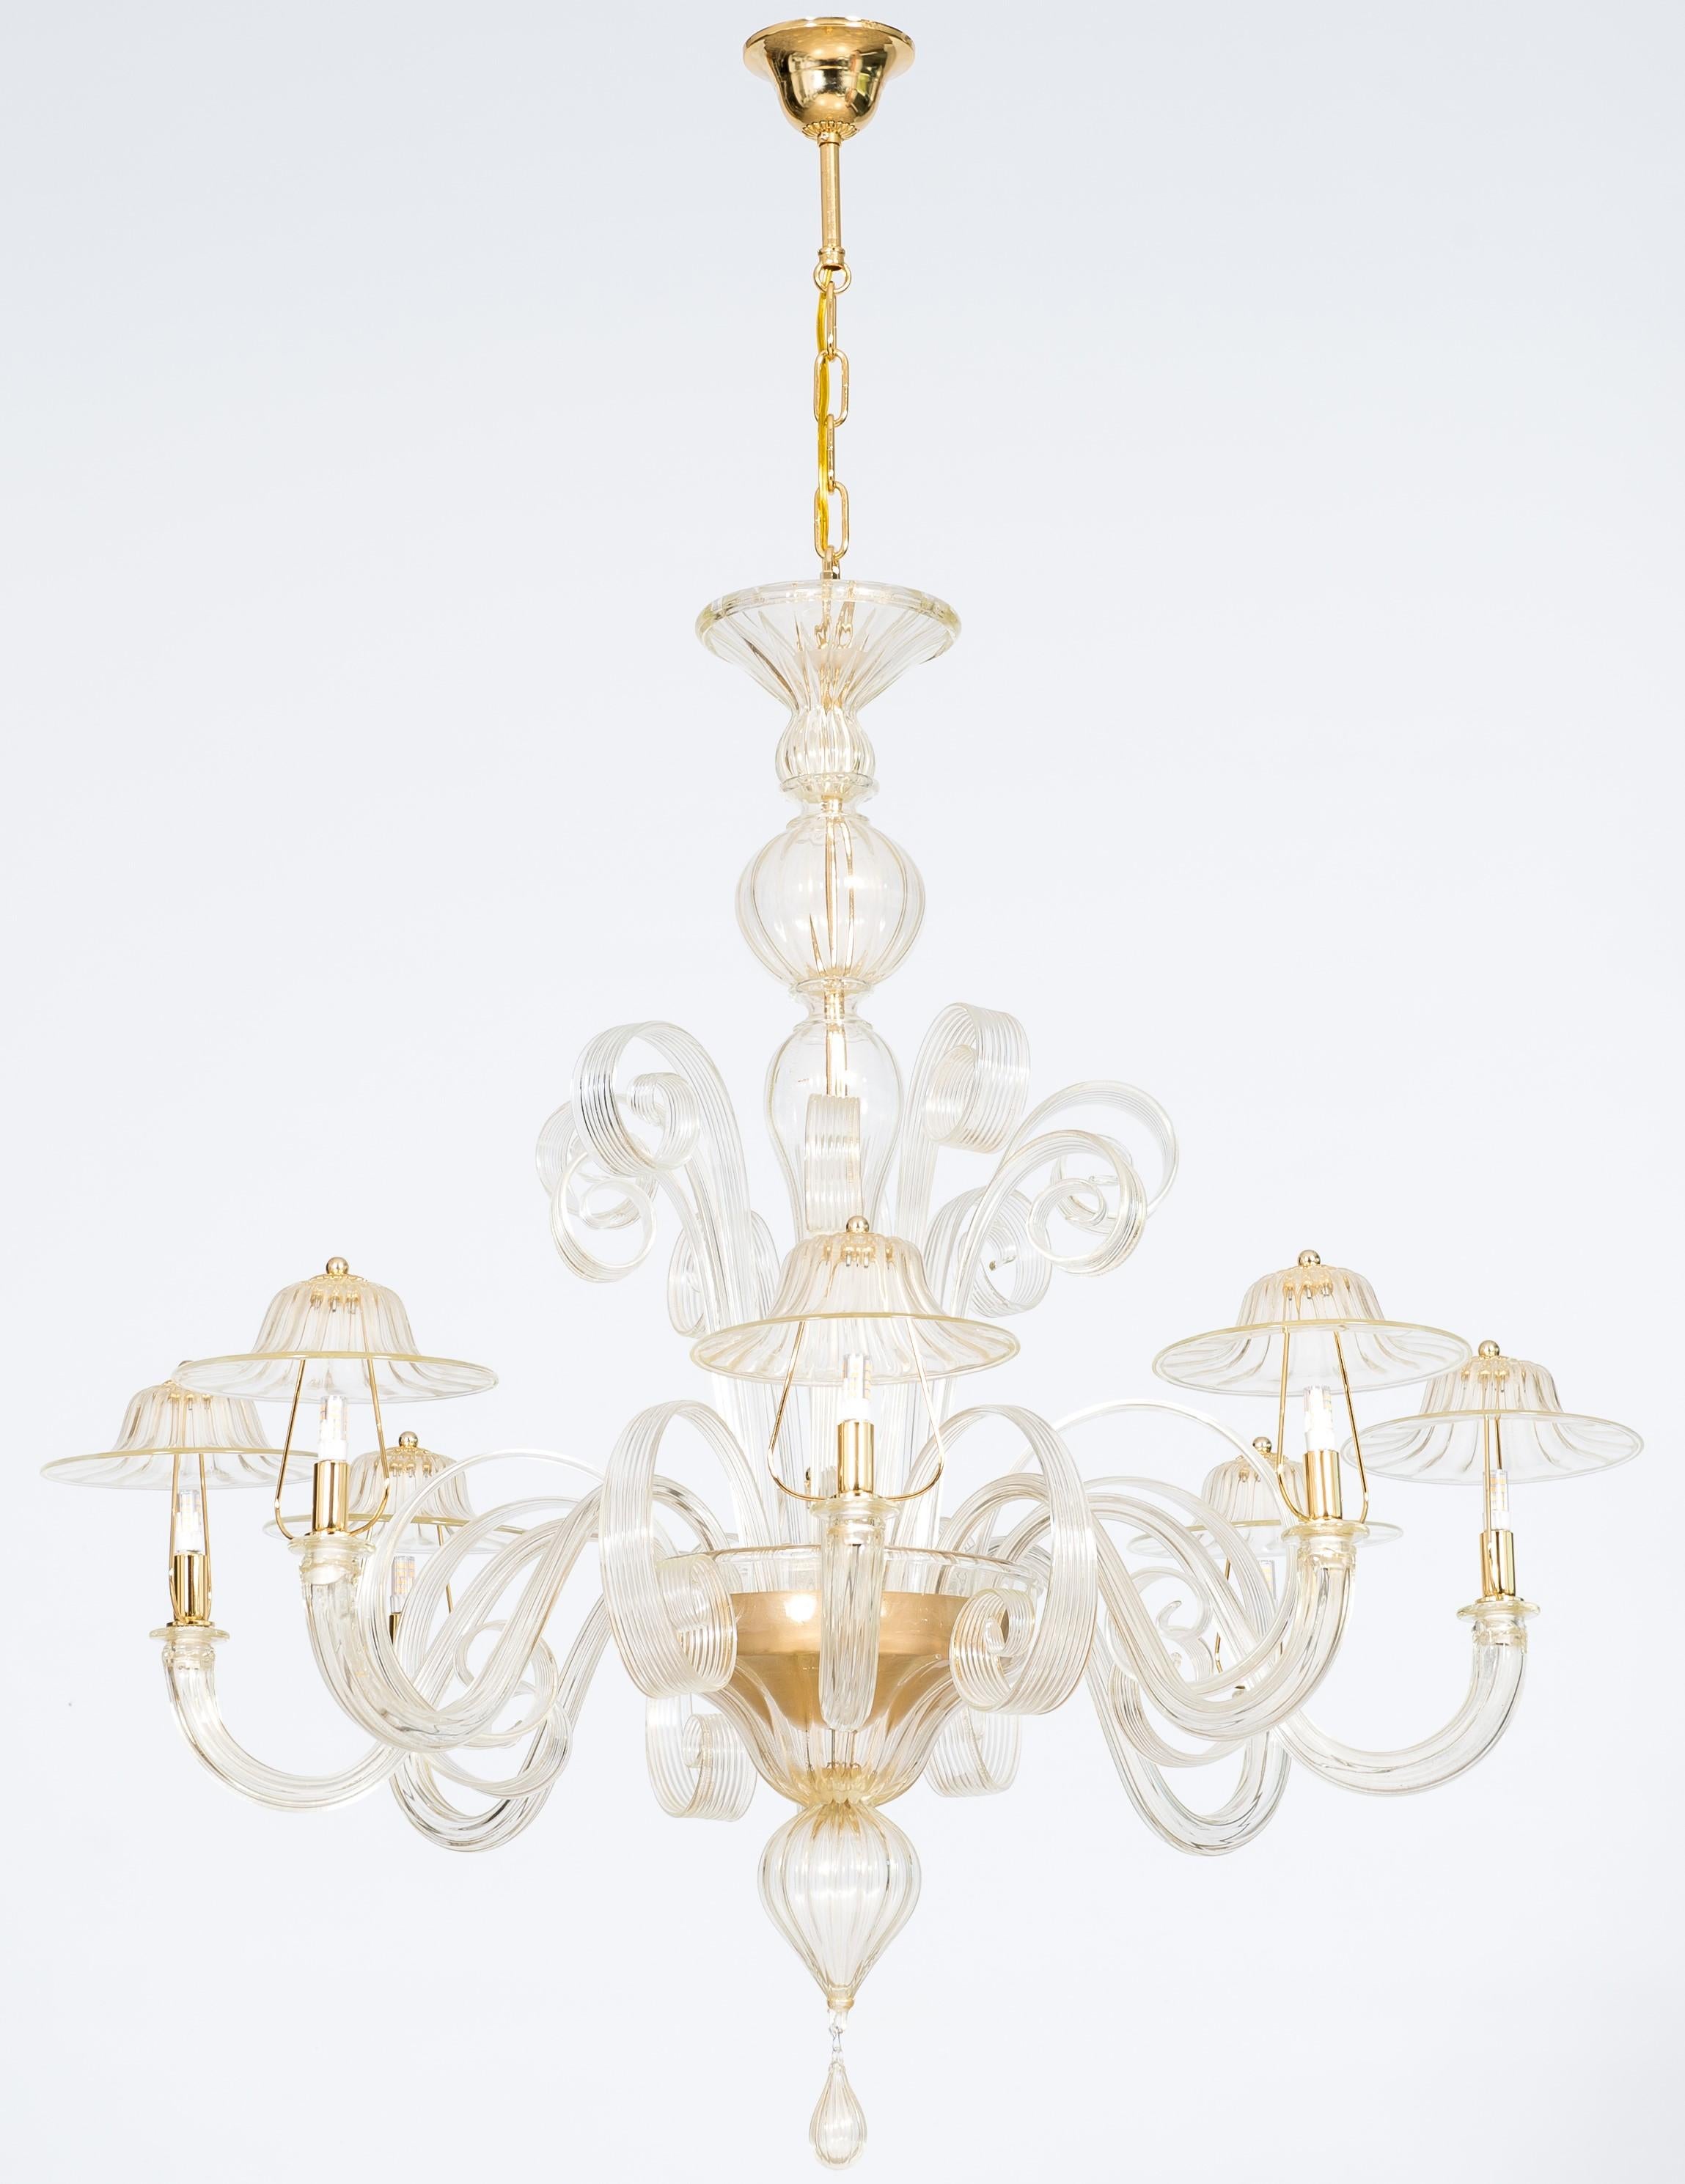 Murano glass chandelier with 24-Karat Gold and Pastoral Decorations, Italy.
This enchanting and unique chandelier is a superb example of the Murano glass century-old art. 
Its 37.5” height can be extended up to an additional 13.5” (51” in total)